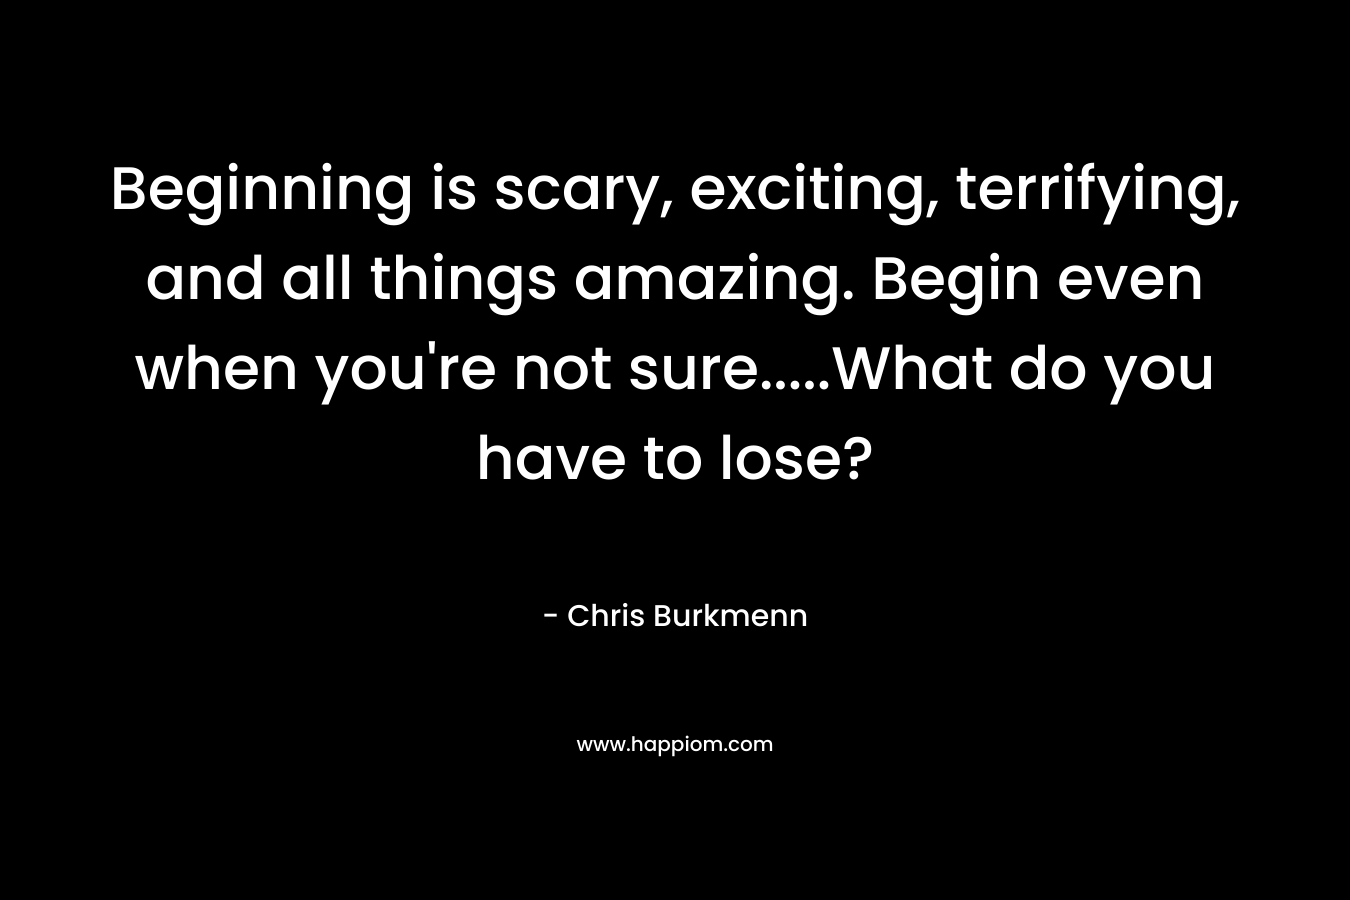 Beginning is scary, exciting, terrifying, and all things amazing. Begin even when you're not sure.....What do you have to lose?